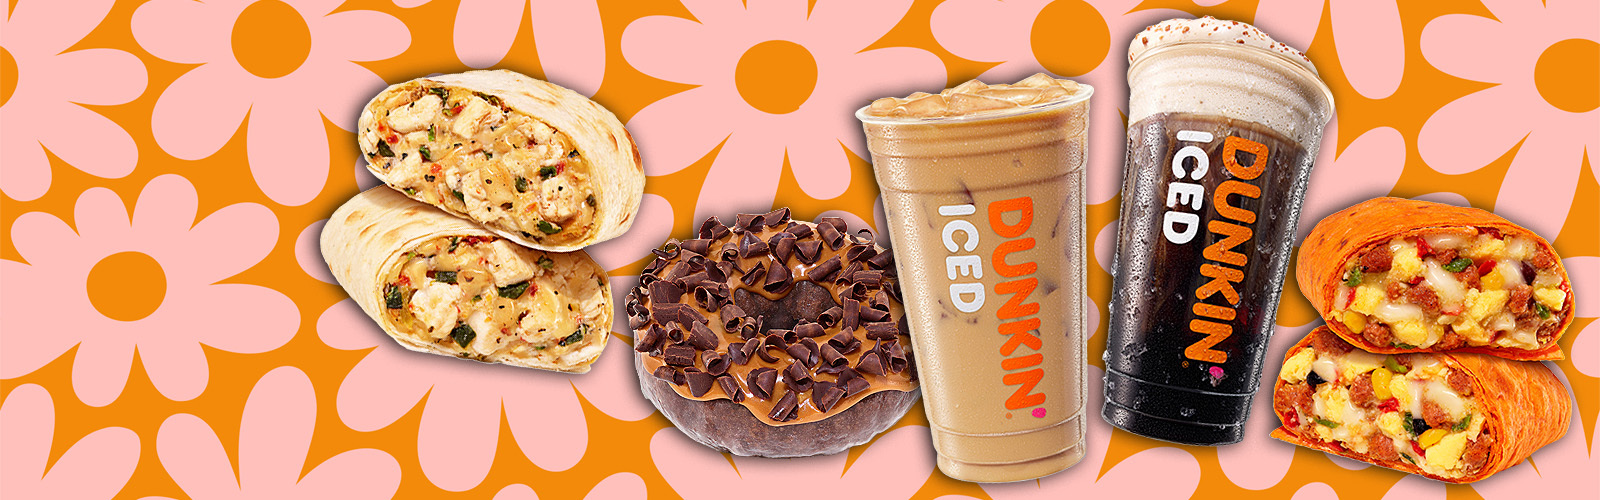 Dunkin Review